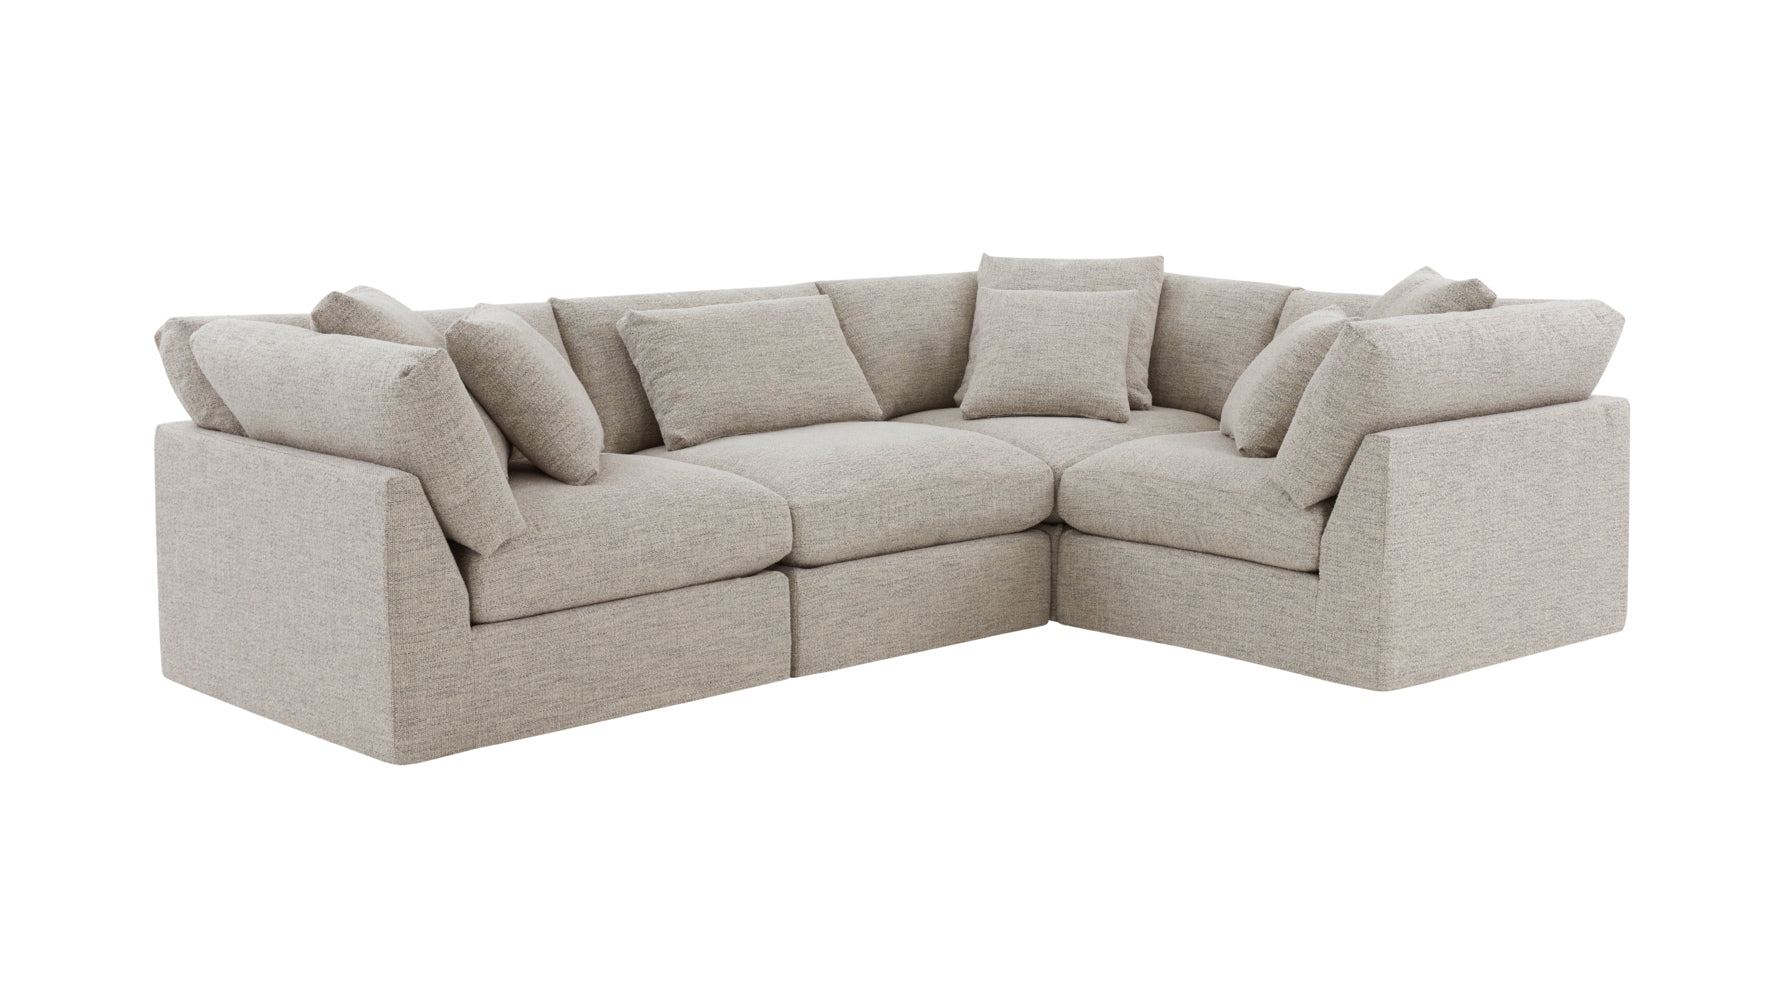 Get Together™ 4-Piece Modular Sectional Closed, Large, Oatmeal - Image 2